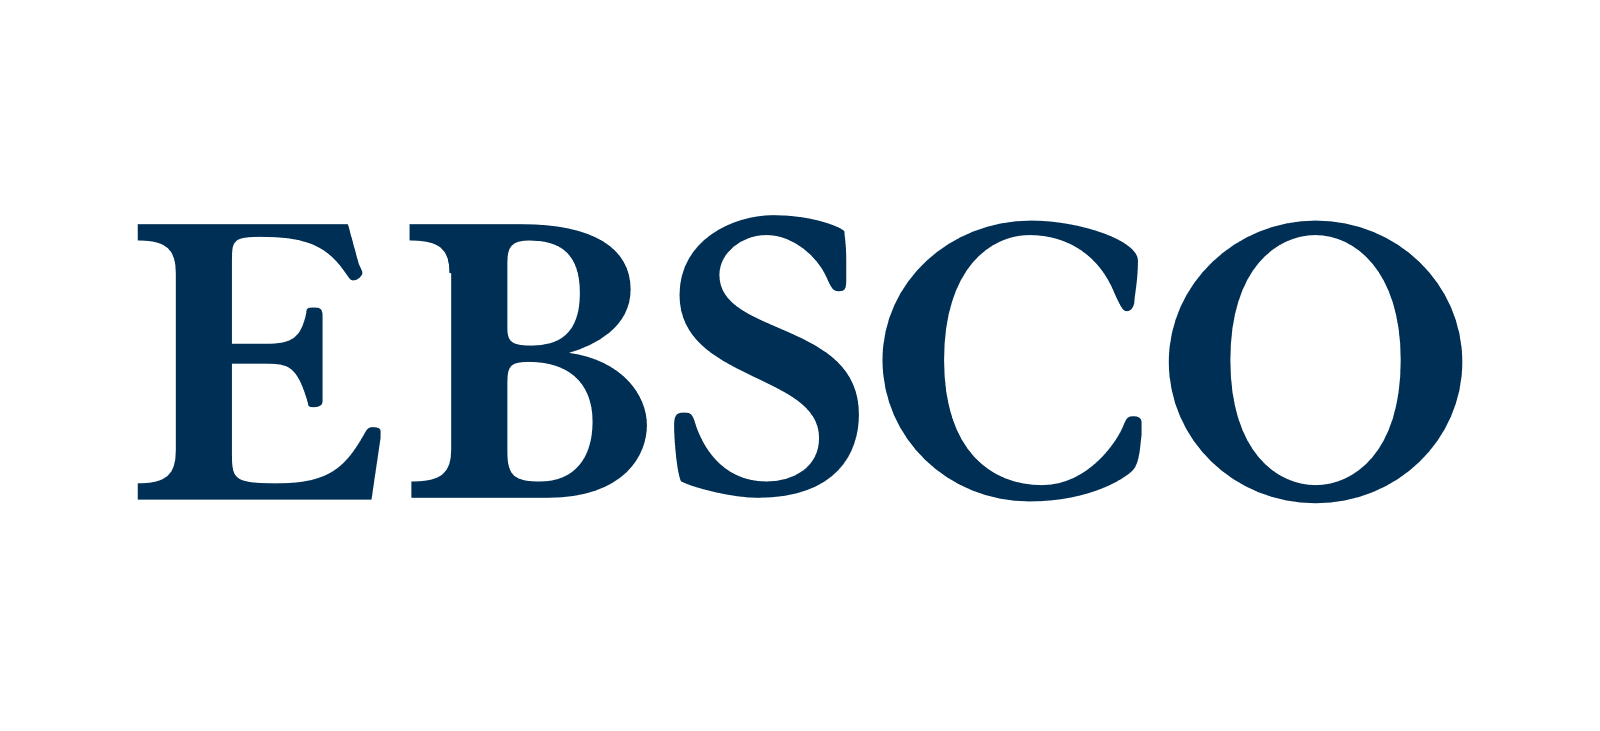 EBSCO Medical Research Databases